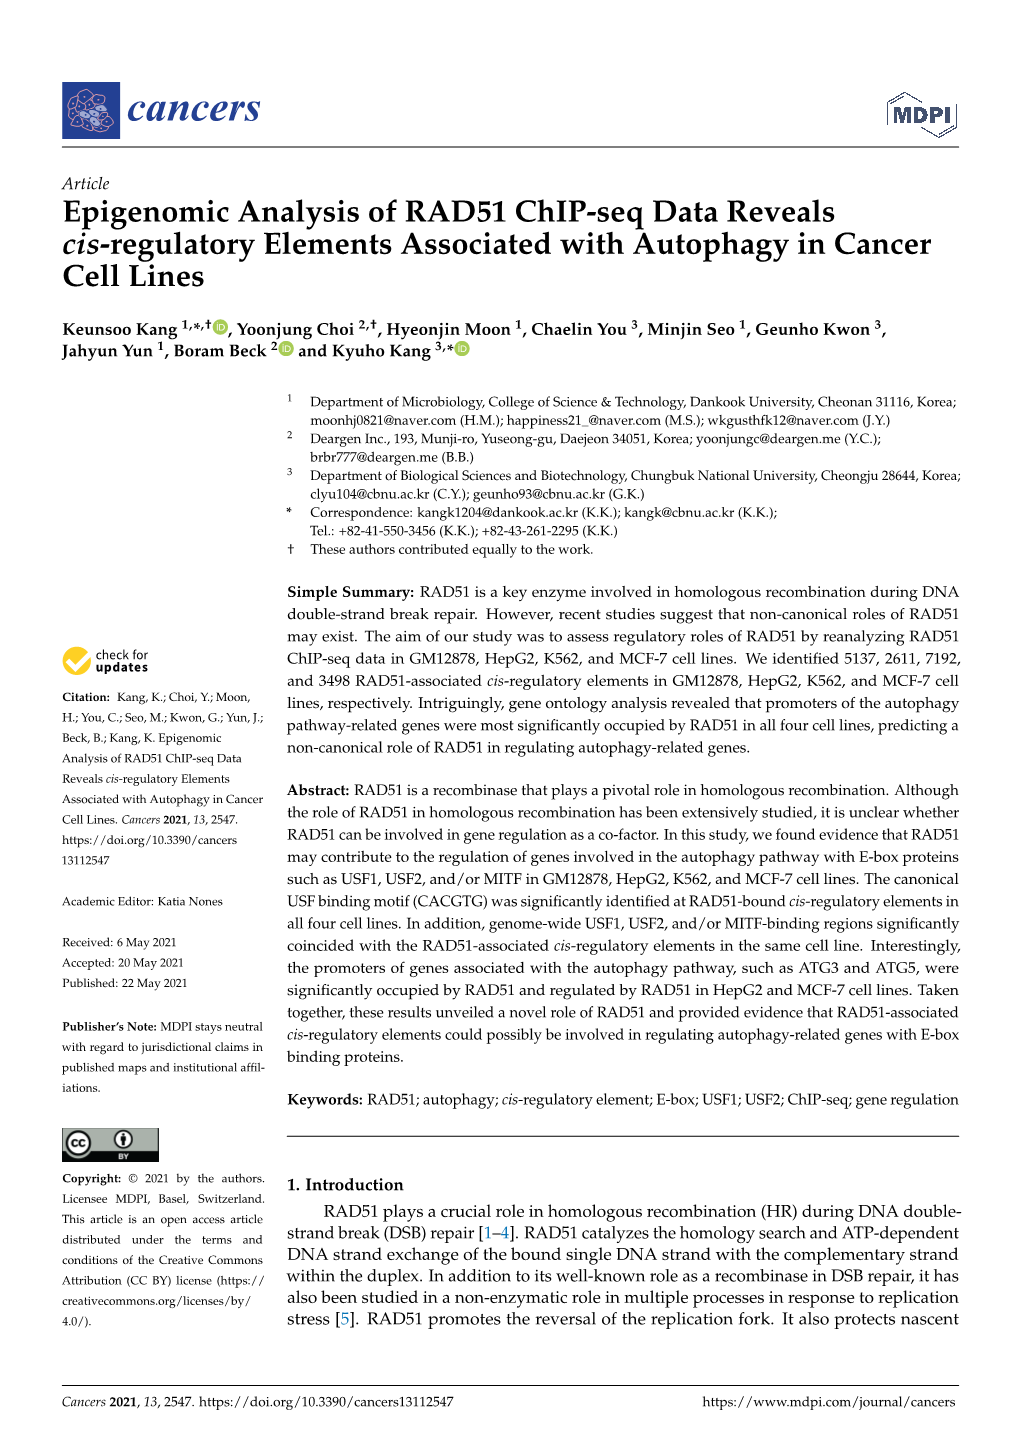 Epigenomic Analysis of RAD51 Chip-Seq Data Reveals Cis-Regulatory Elements Associated with Autophagy in Cancer Cell Lines